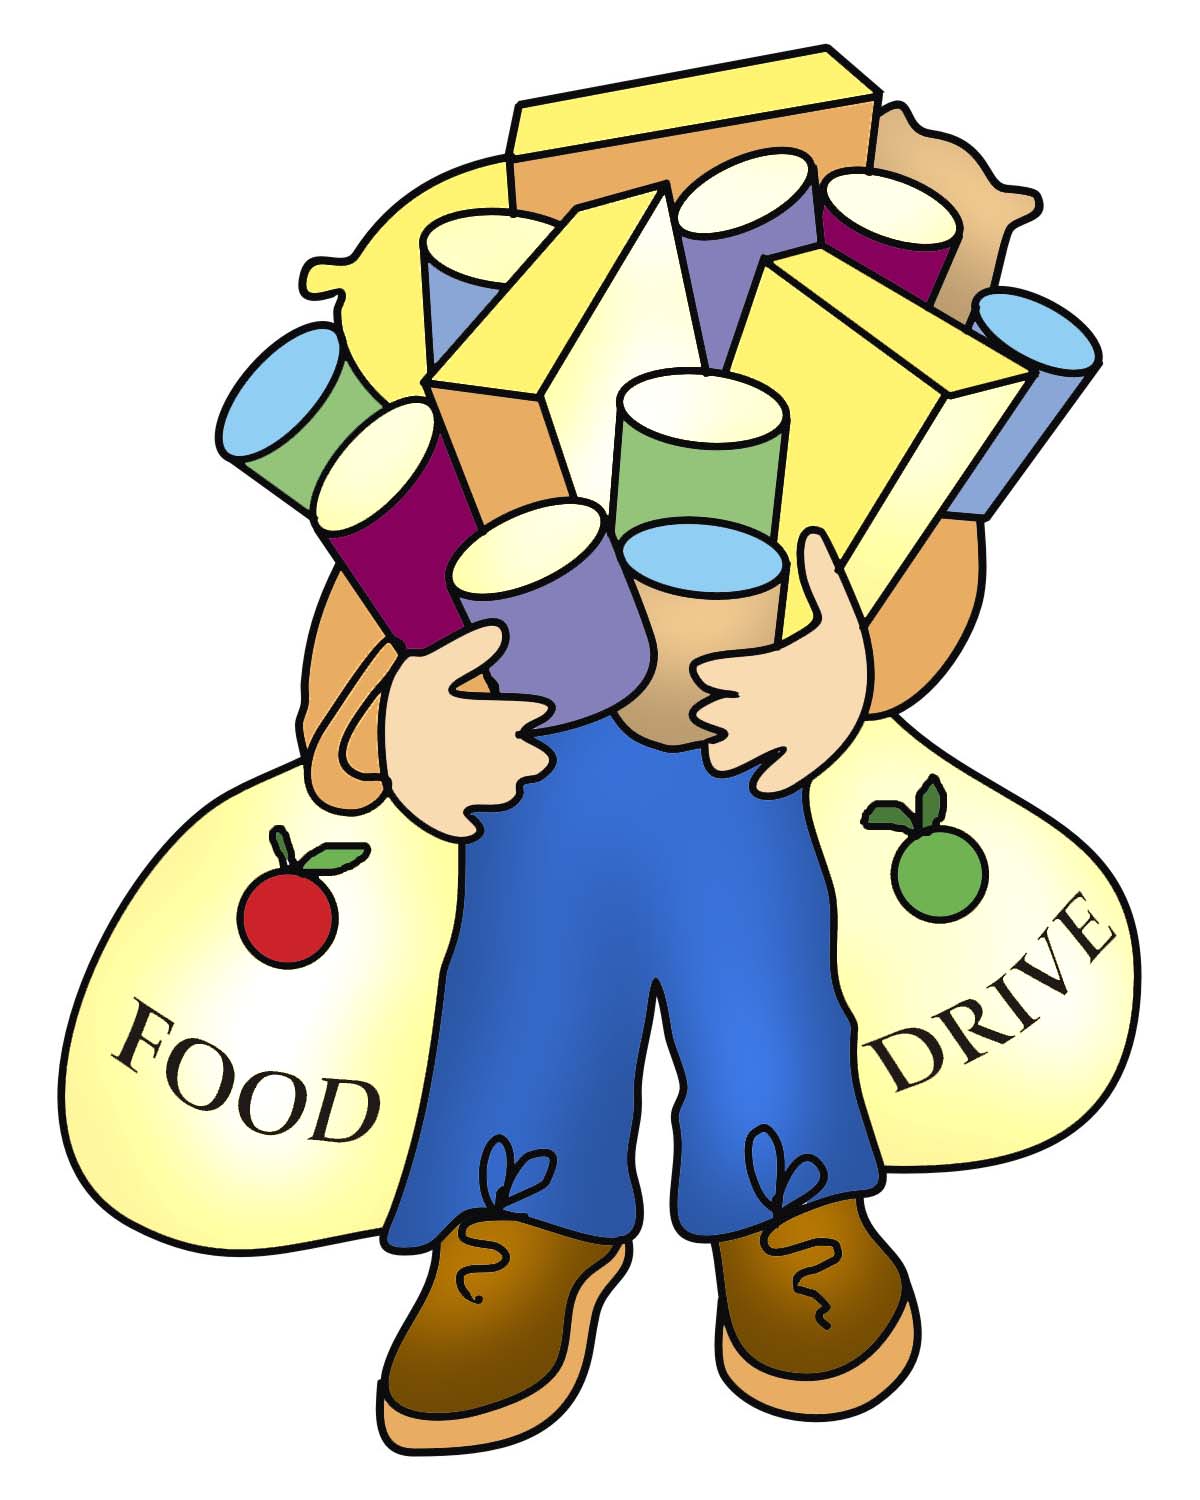 We Are Also Running A Food Drive For Our West Carleton Food Bank This